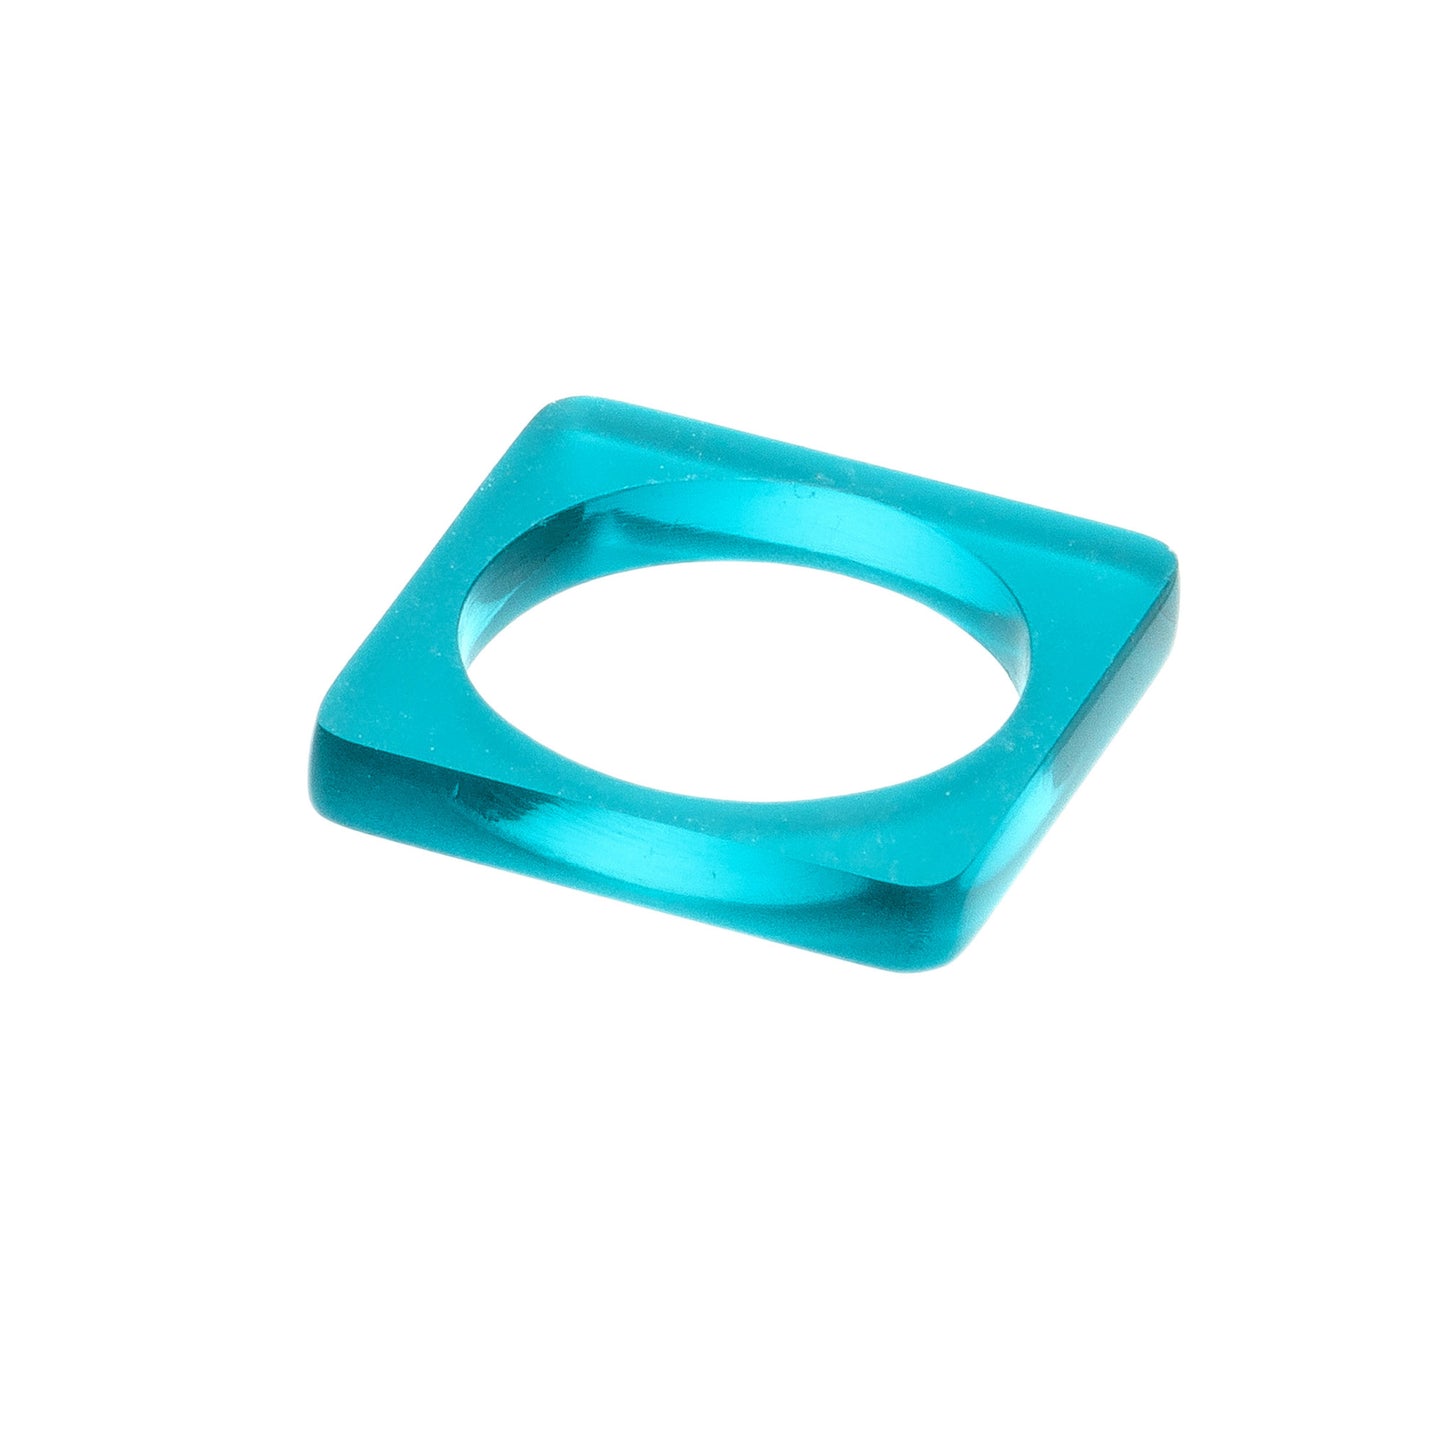 Square ring in azure perspex www.barbararspence.co.uk